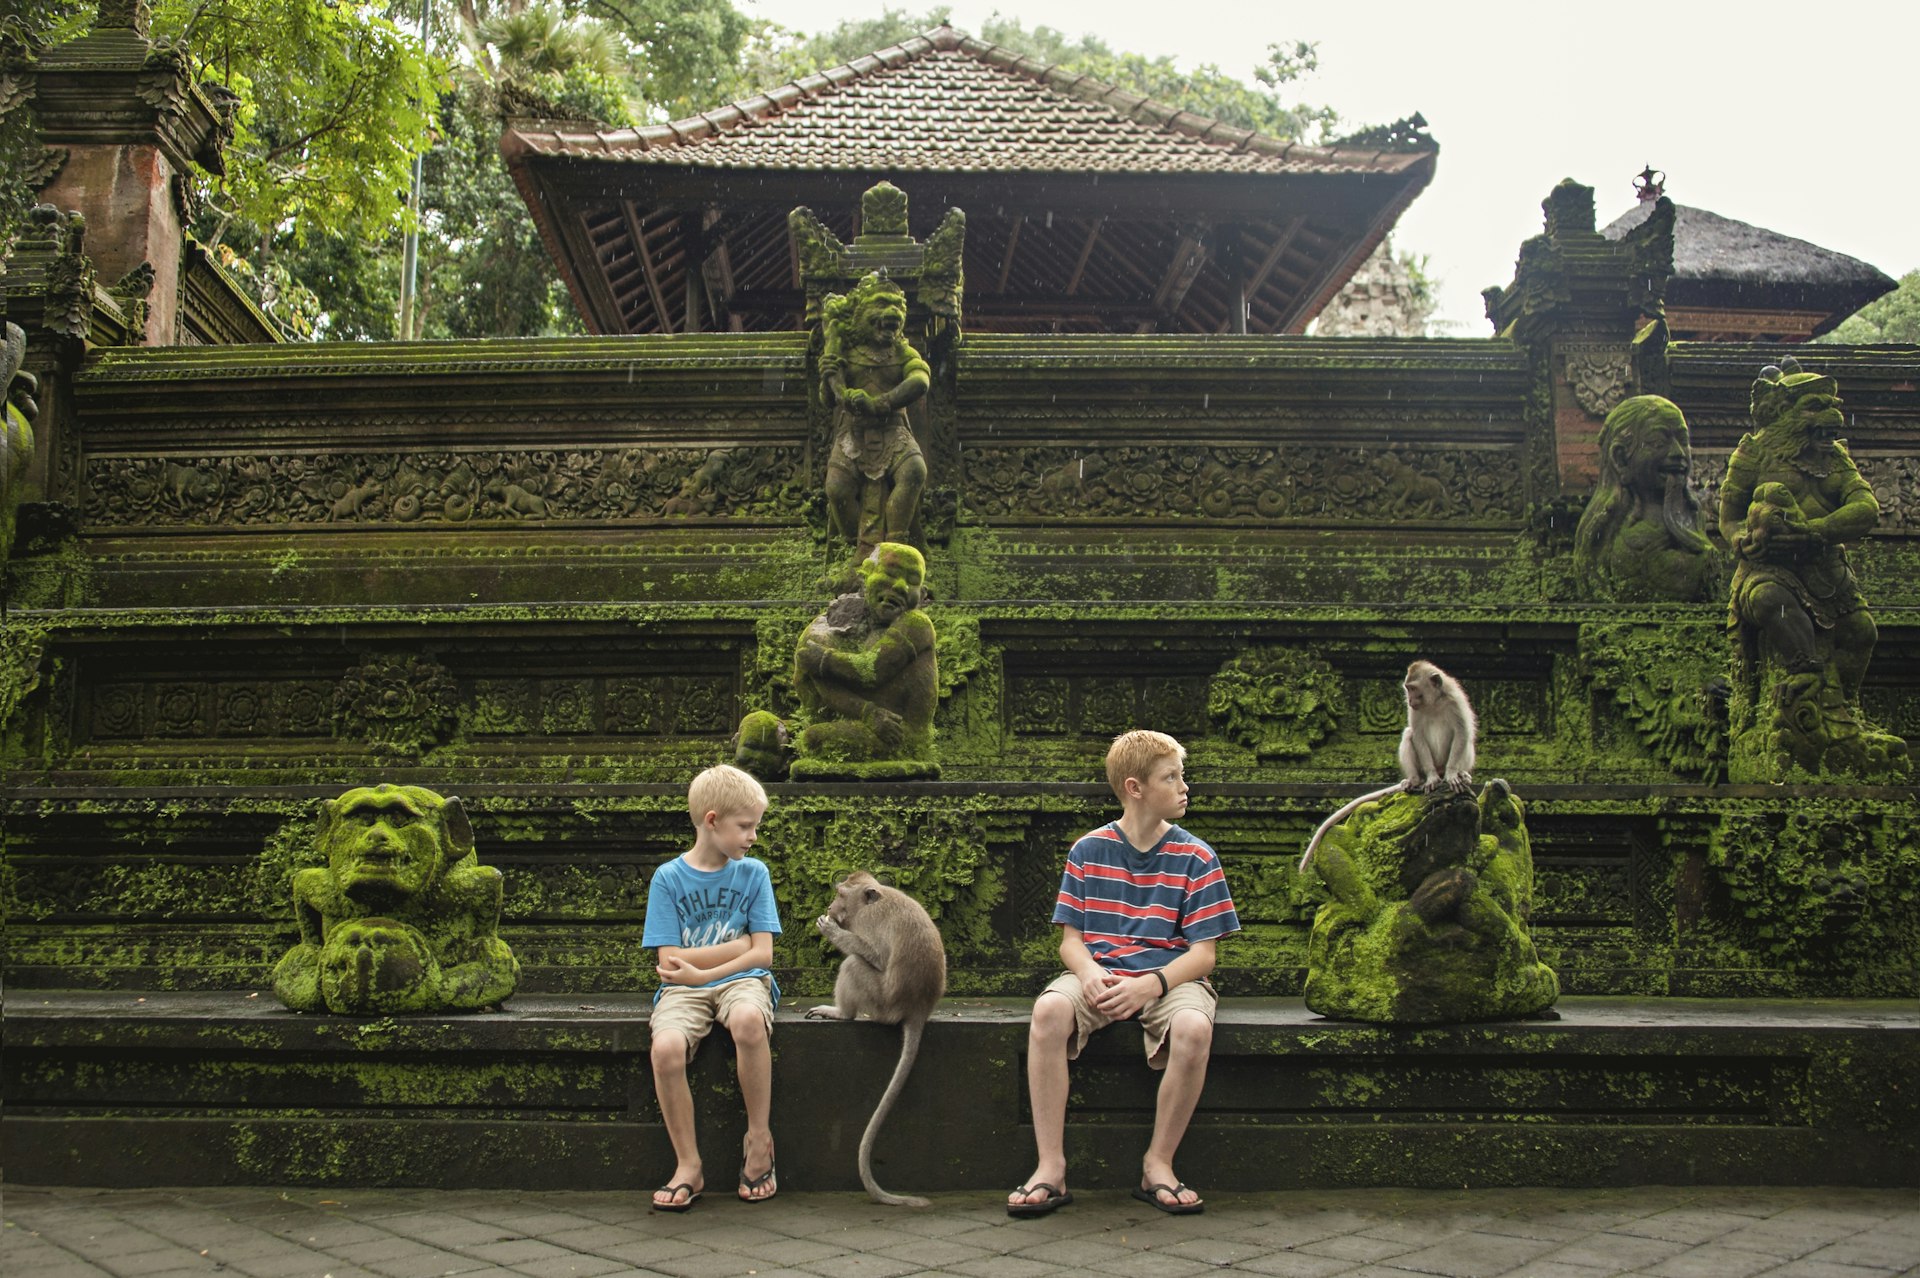 Two boys sit on the wall outside a temple looking at two monkeys